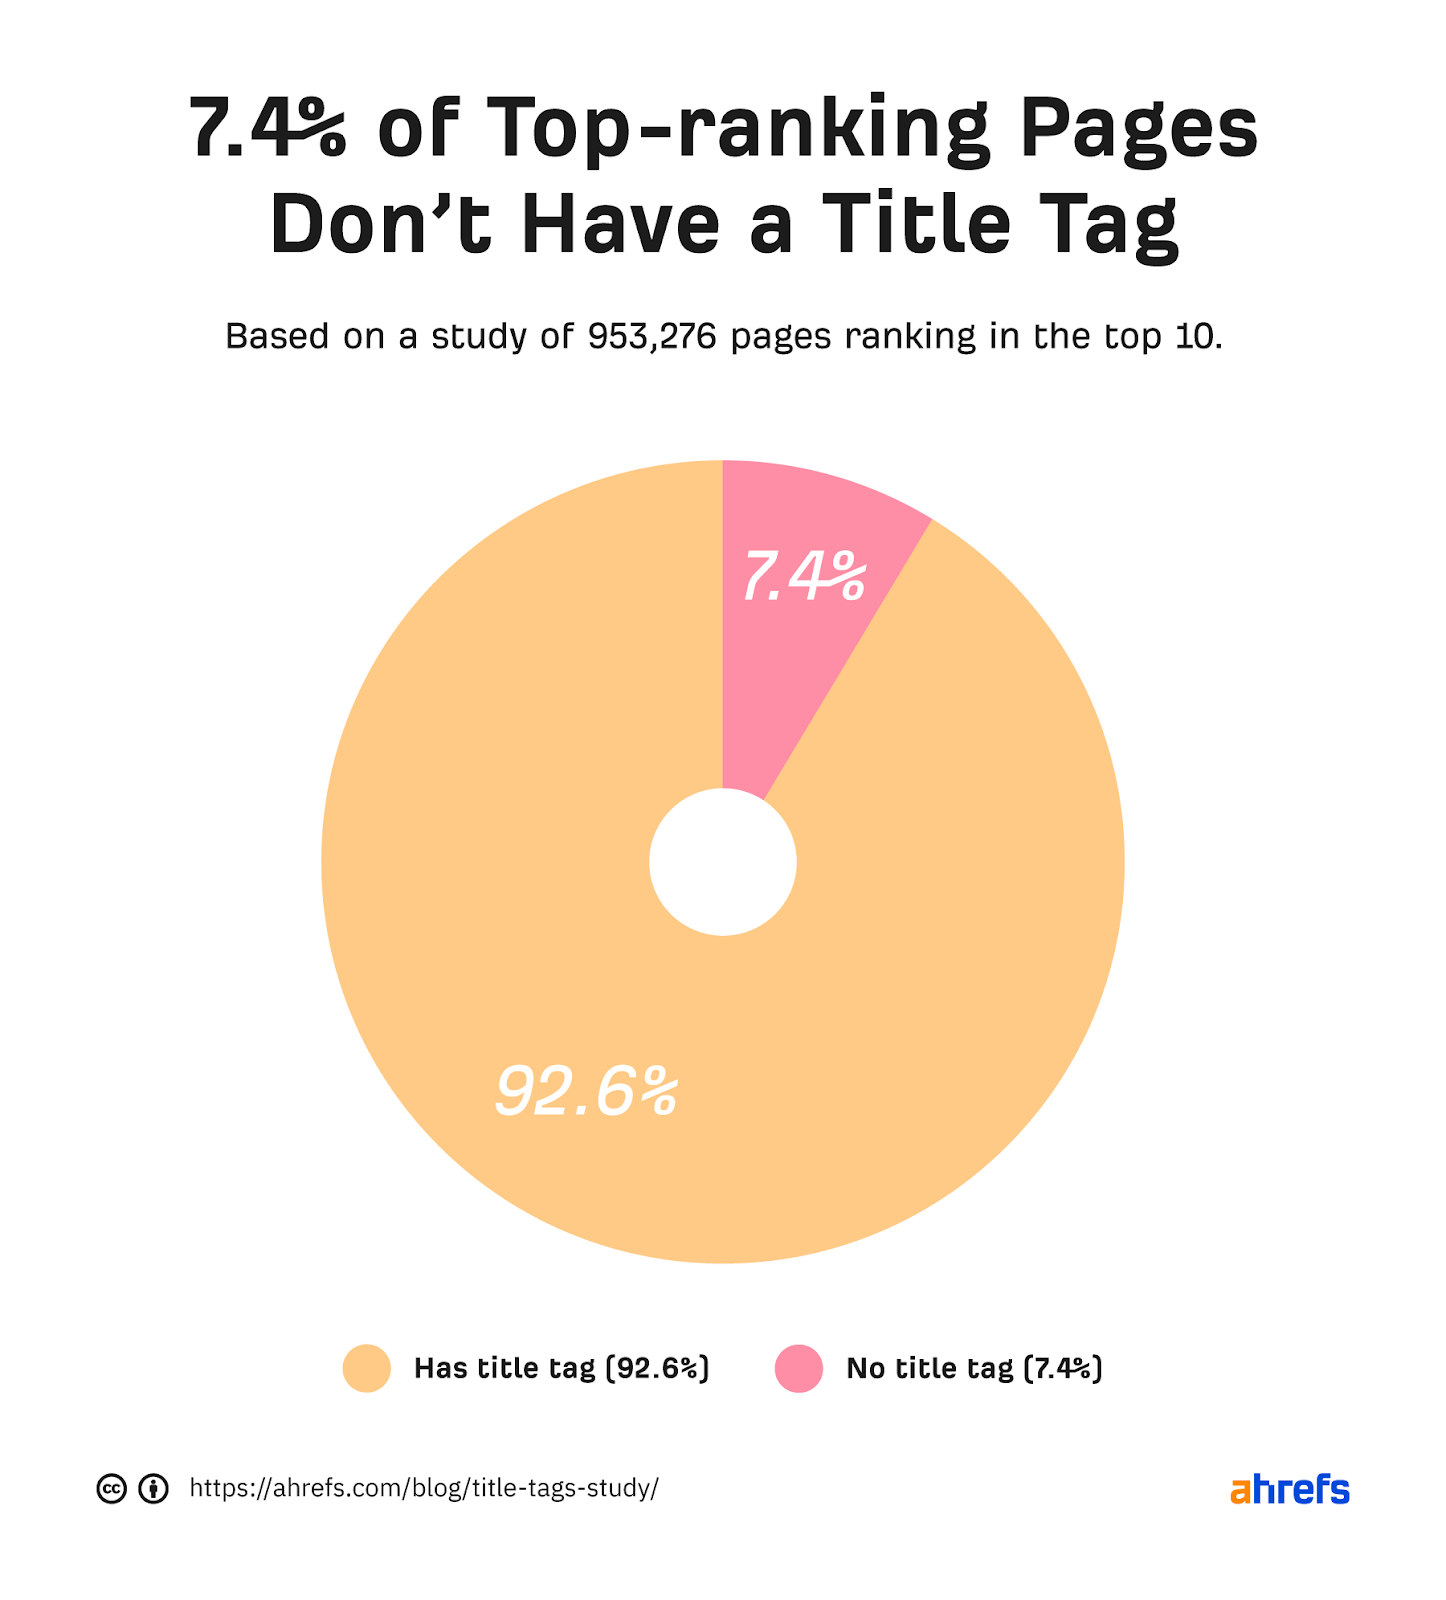 Pie chart showing 7.4% of top-ranking pages have no title tags